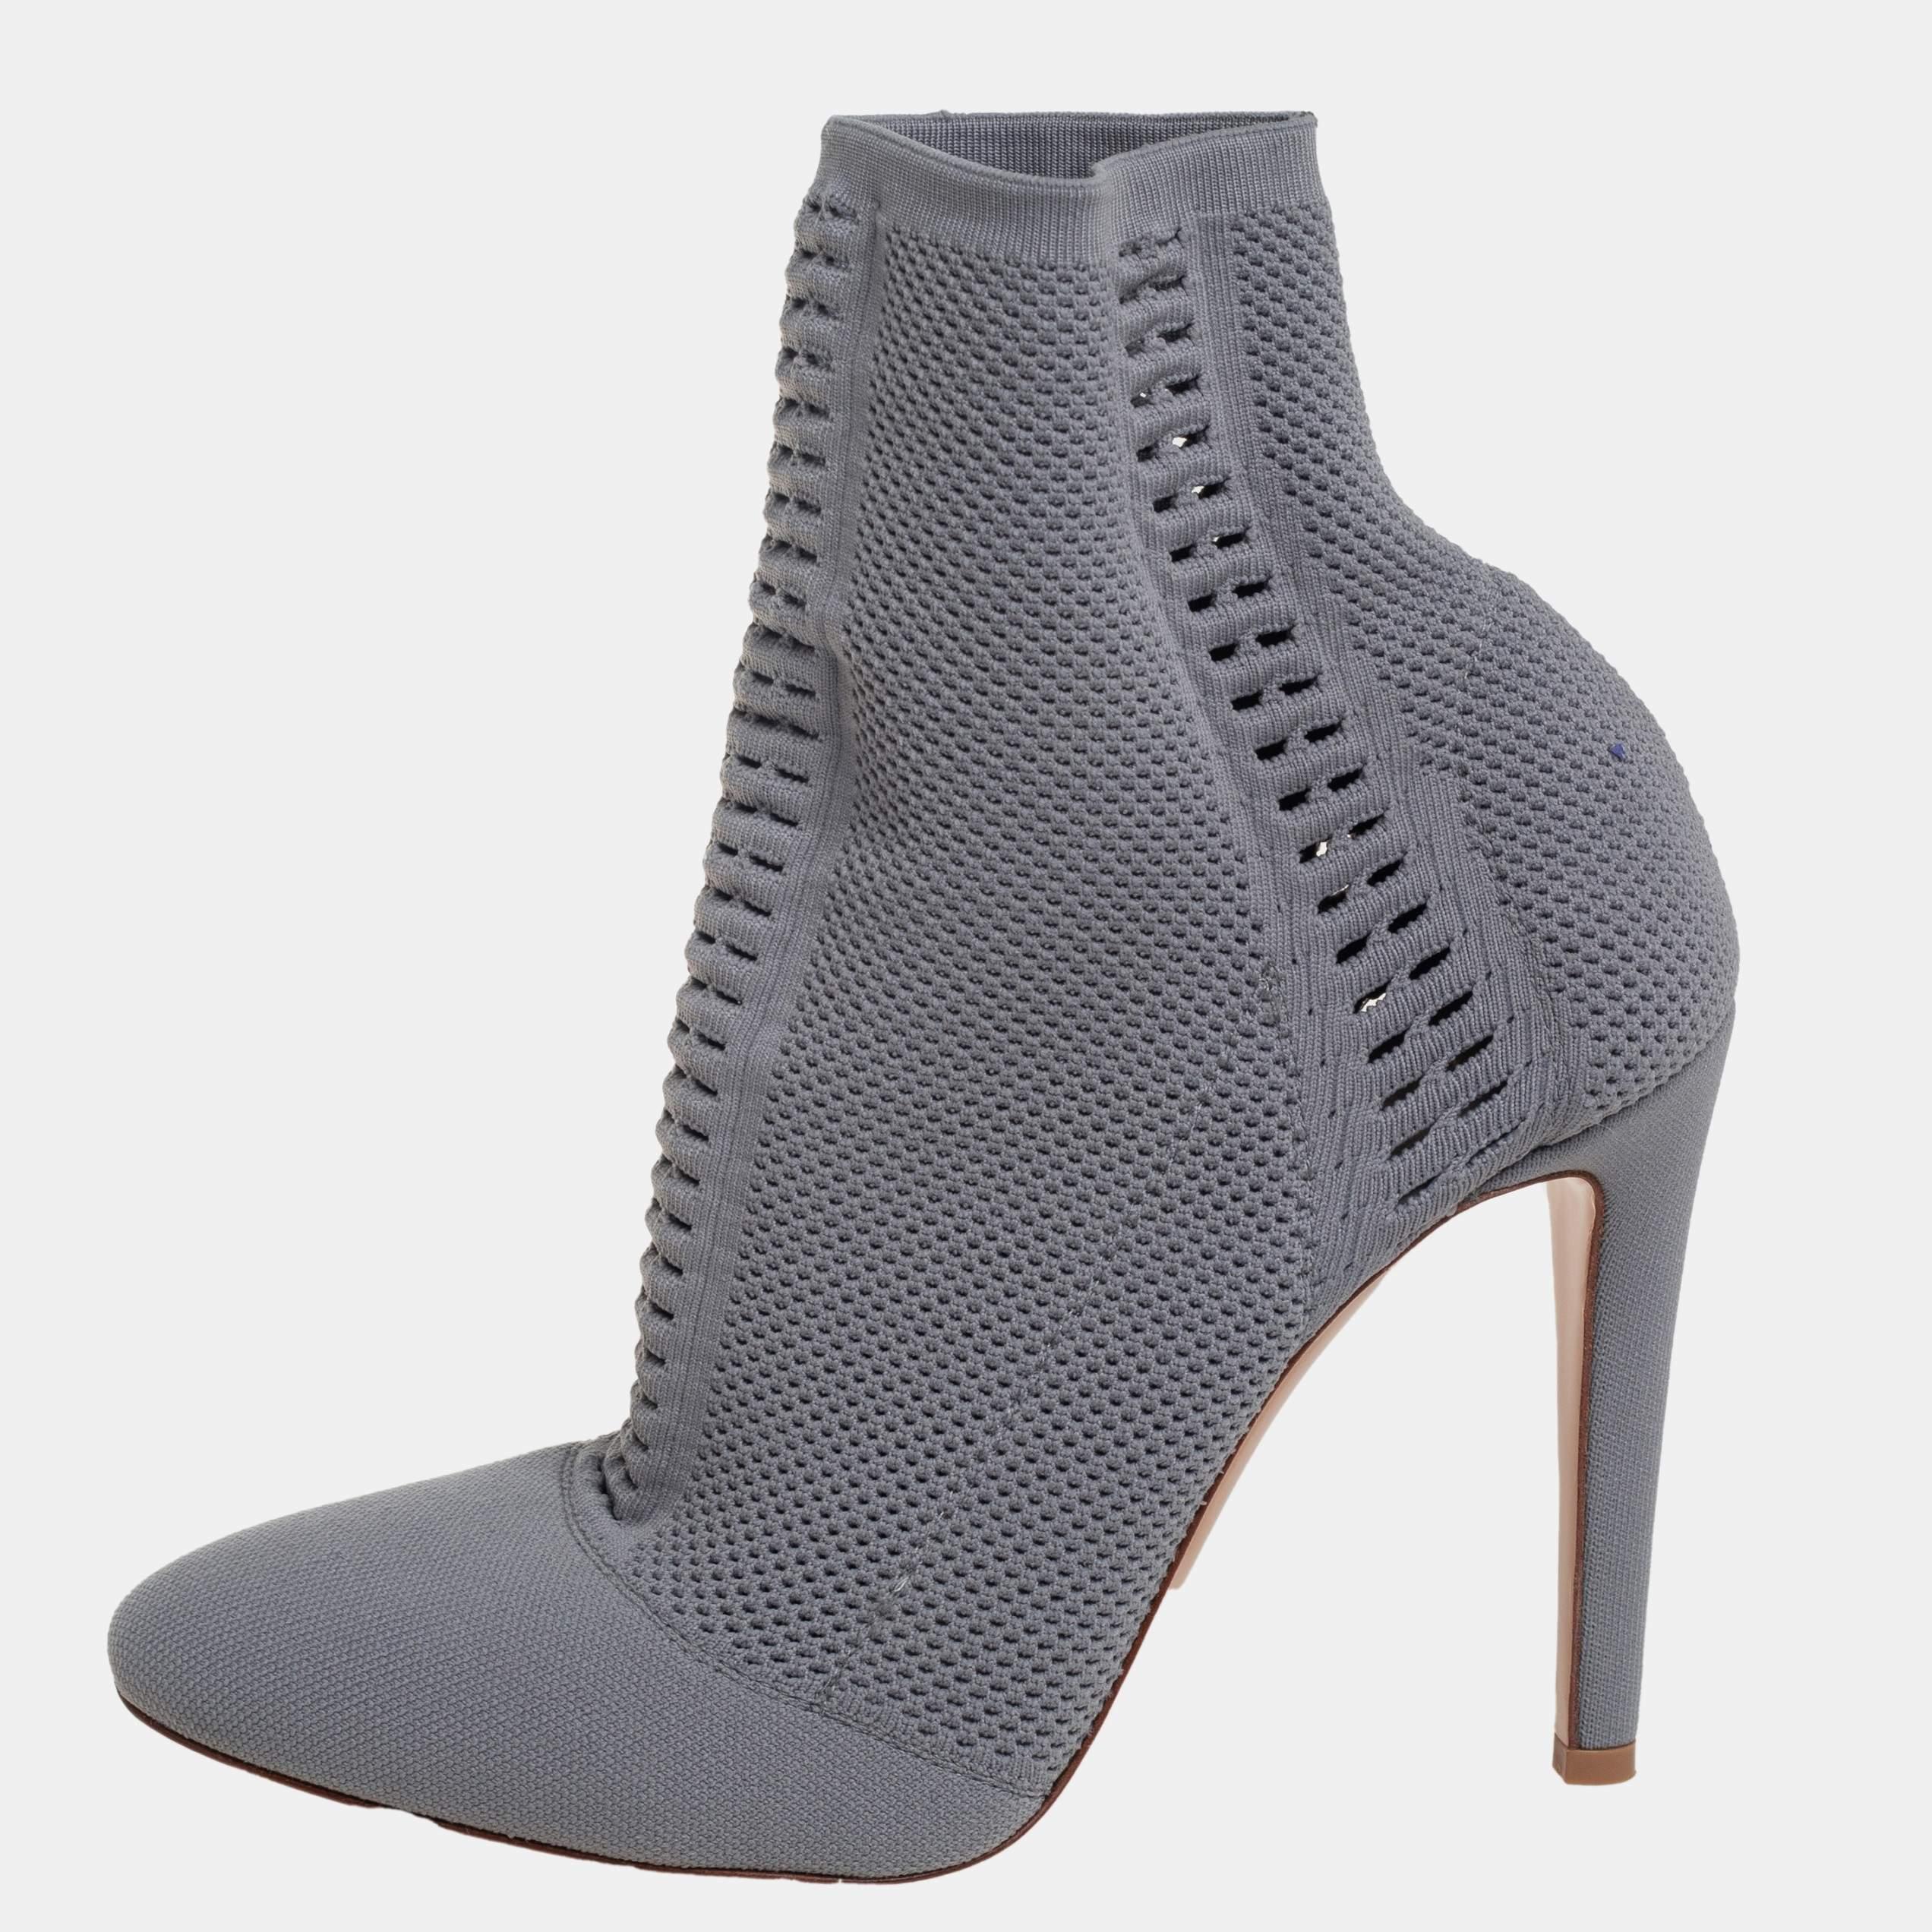 These Thurlow boots from Gianvito Rossi are crafted with finesse and lend an aura of sophistication to your look. Crafted from stretch knit in a grey shade, these stylish boots are adorned with almond toes and high heels. Breathable and chic, they